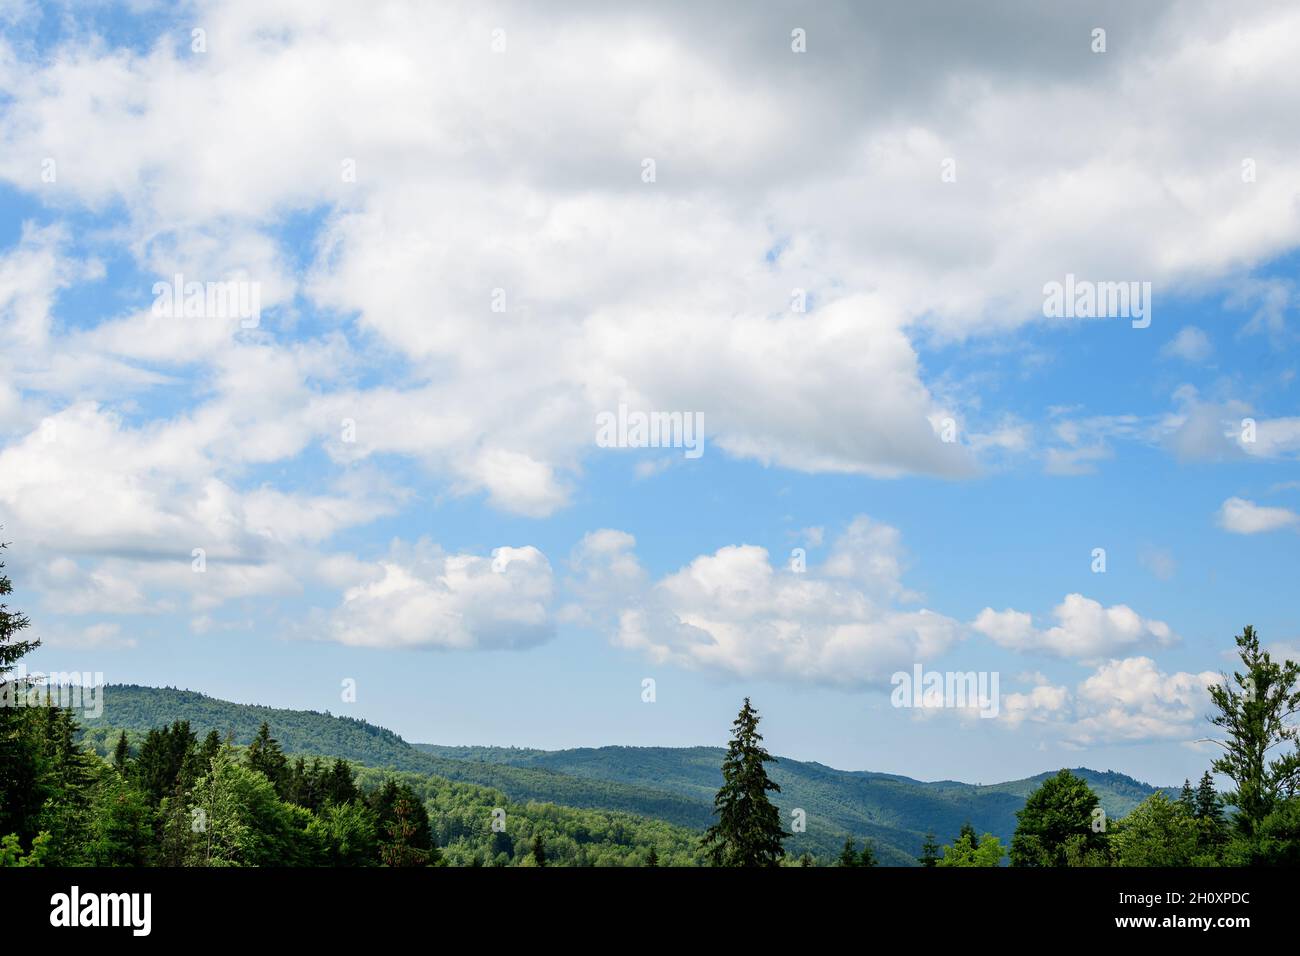 Landscape with many large green trees and fir trees in a forest at at mountains, in a sunny summer day, beautiful outdoor monochrome background Stock Photo